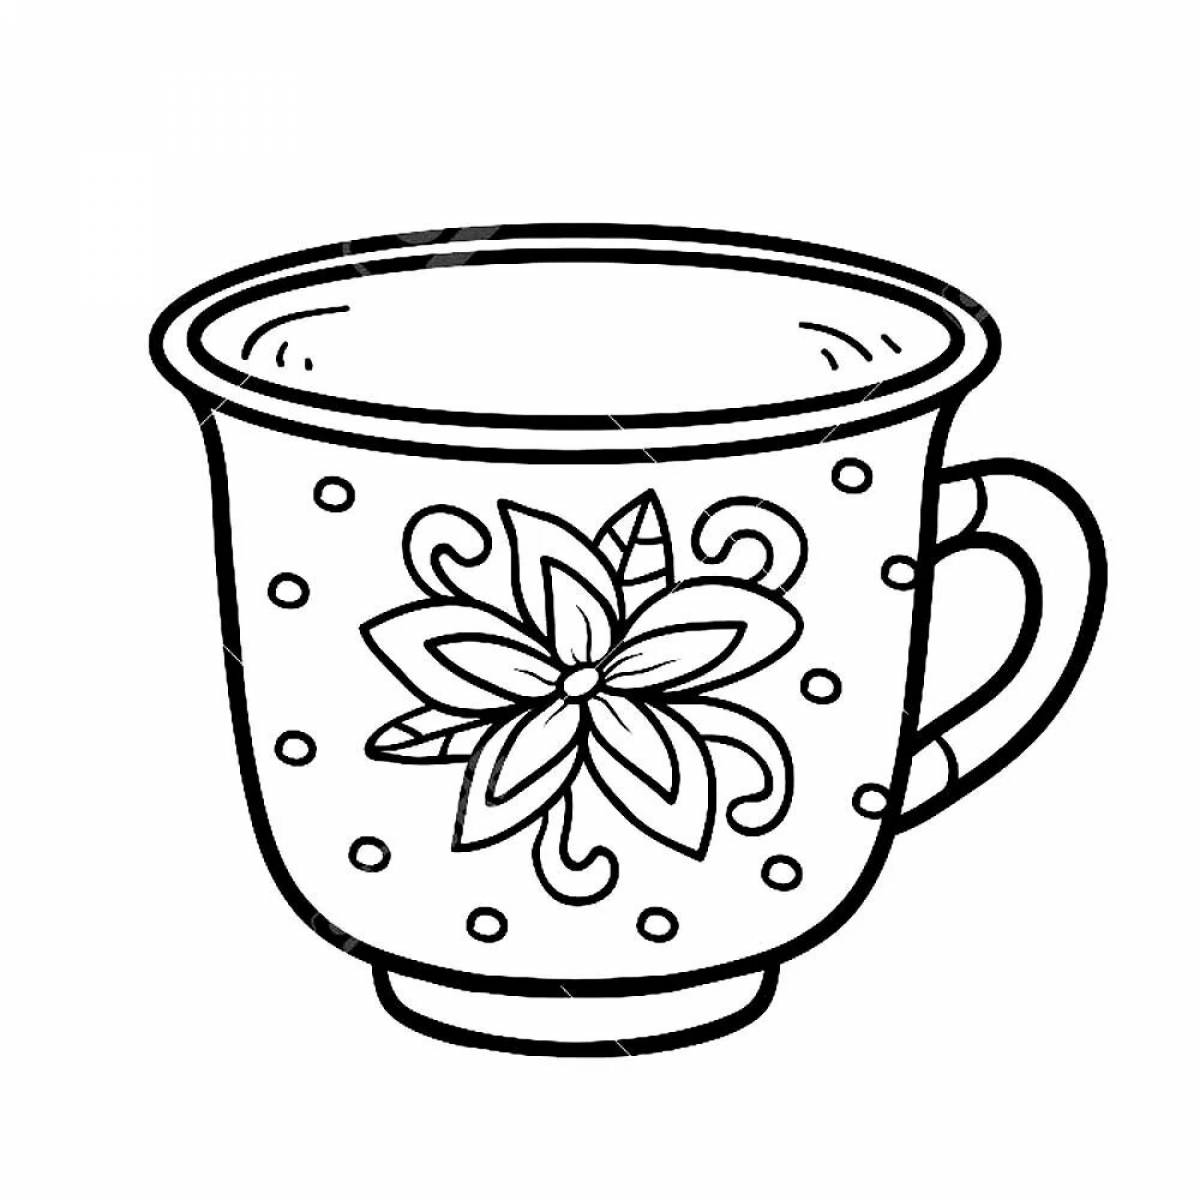 Coloring page unusual tea cup for juniors